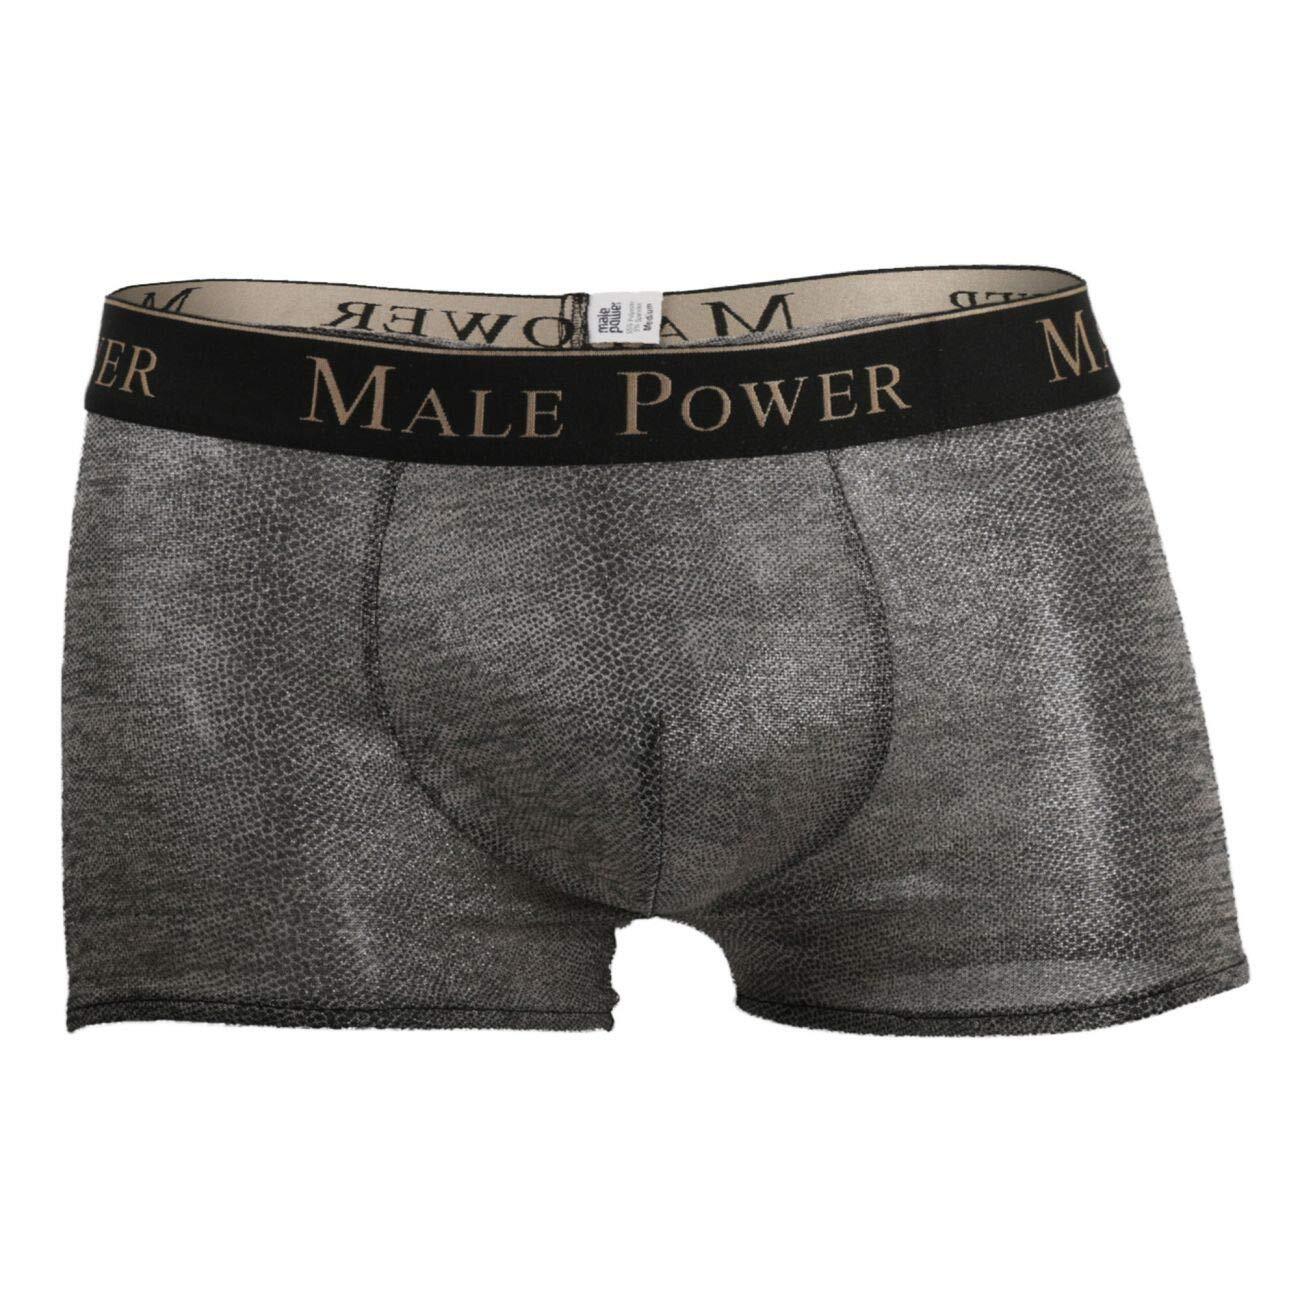 Male Power Viper Pouch Short - Snake - Large L